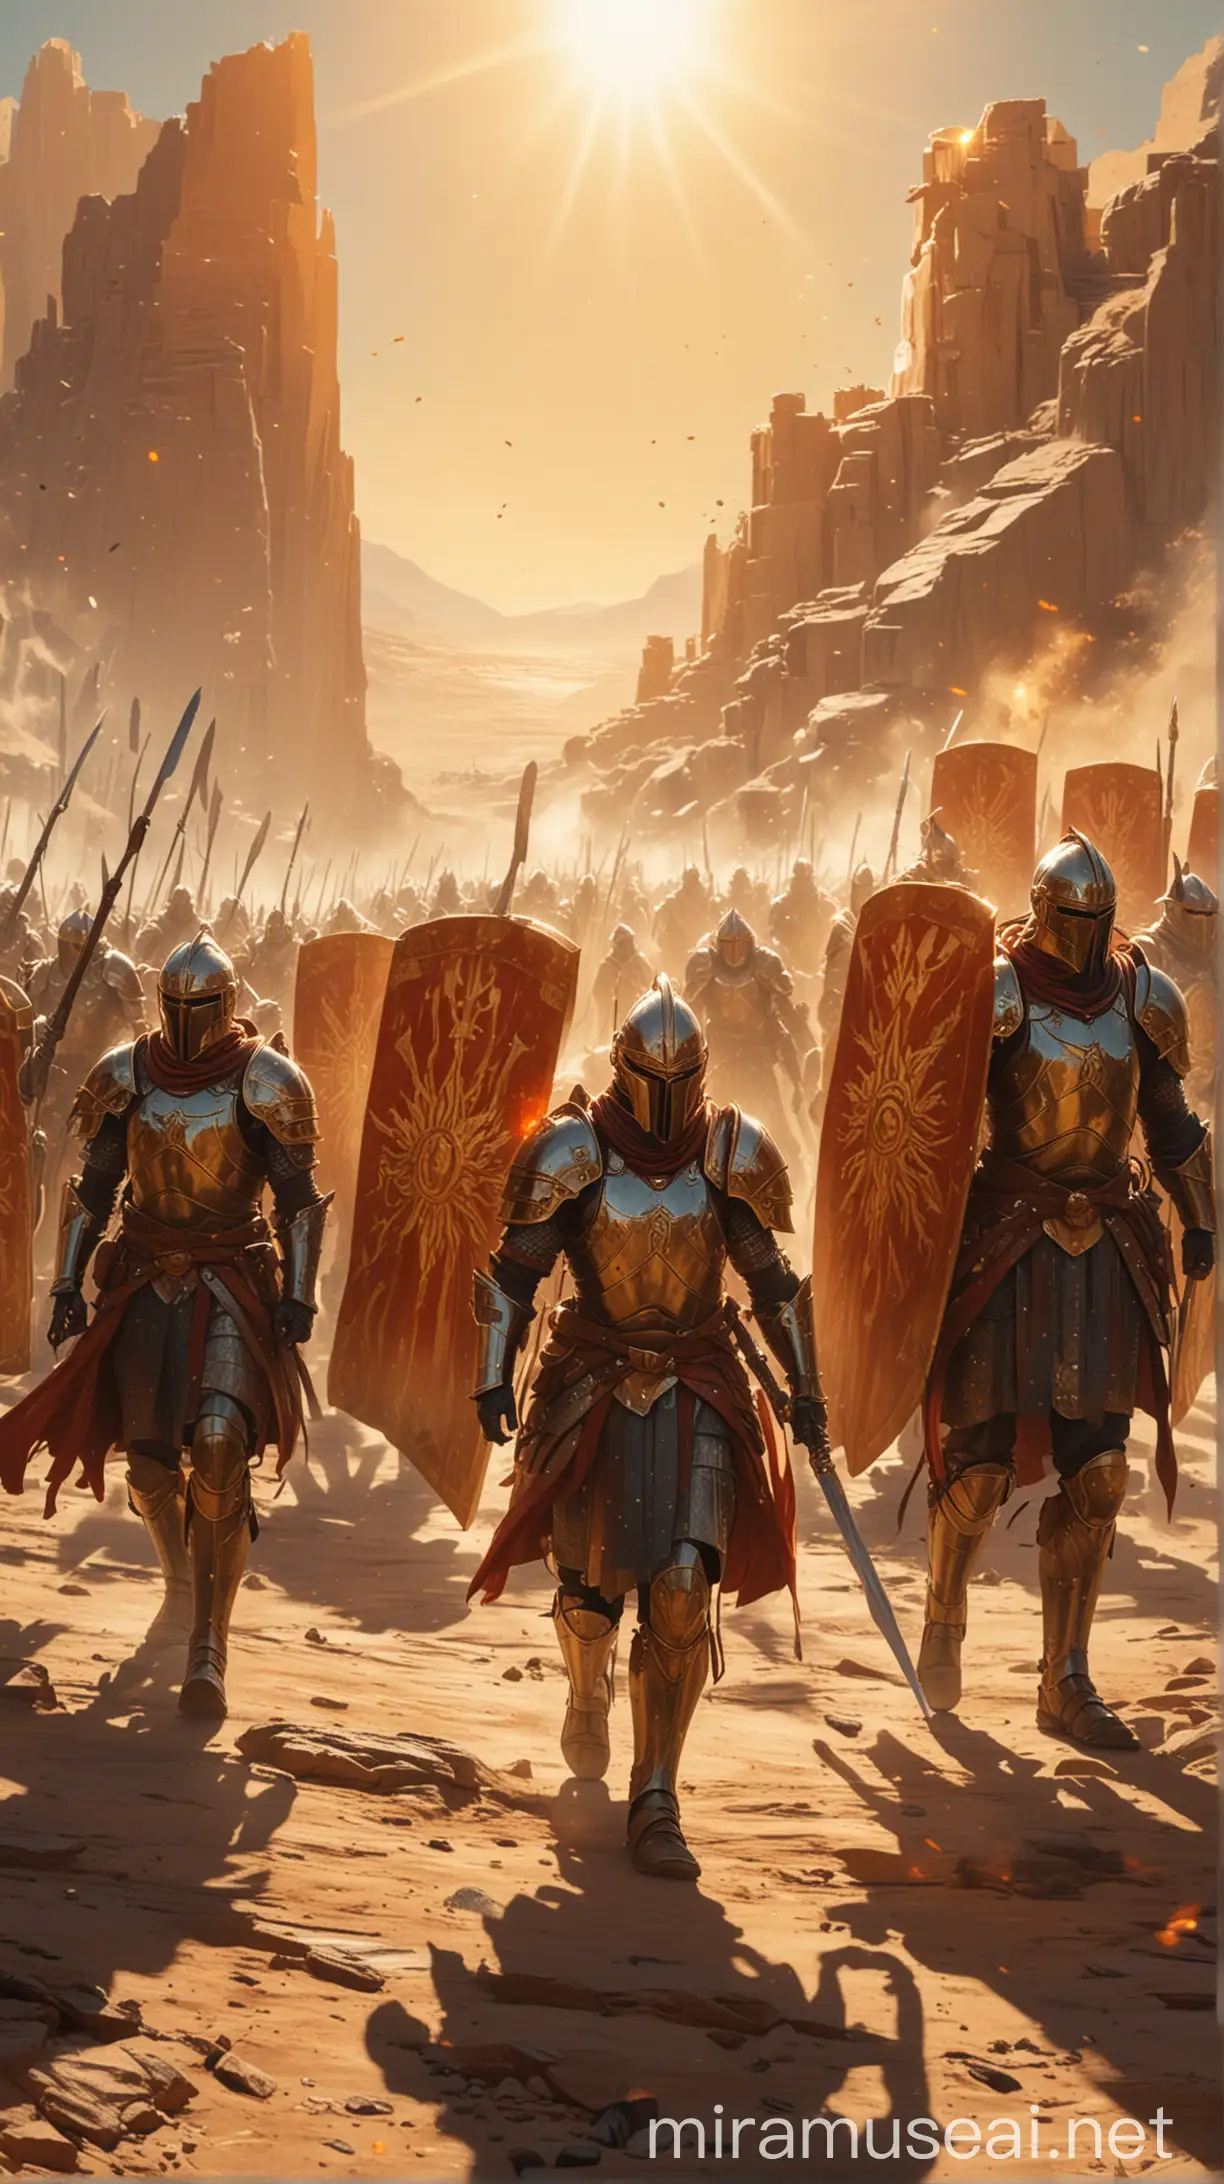 Elite Soldiers Marching with Shields and Swords Under Sunlight